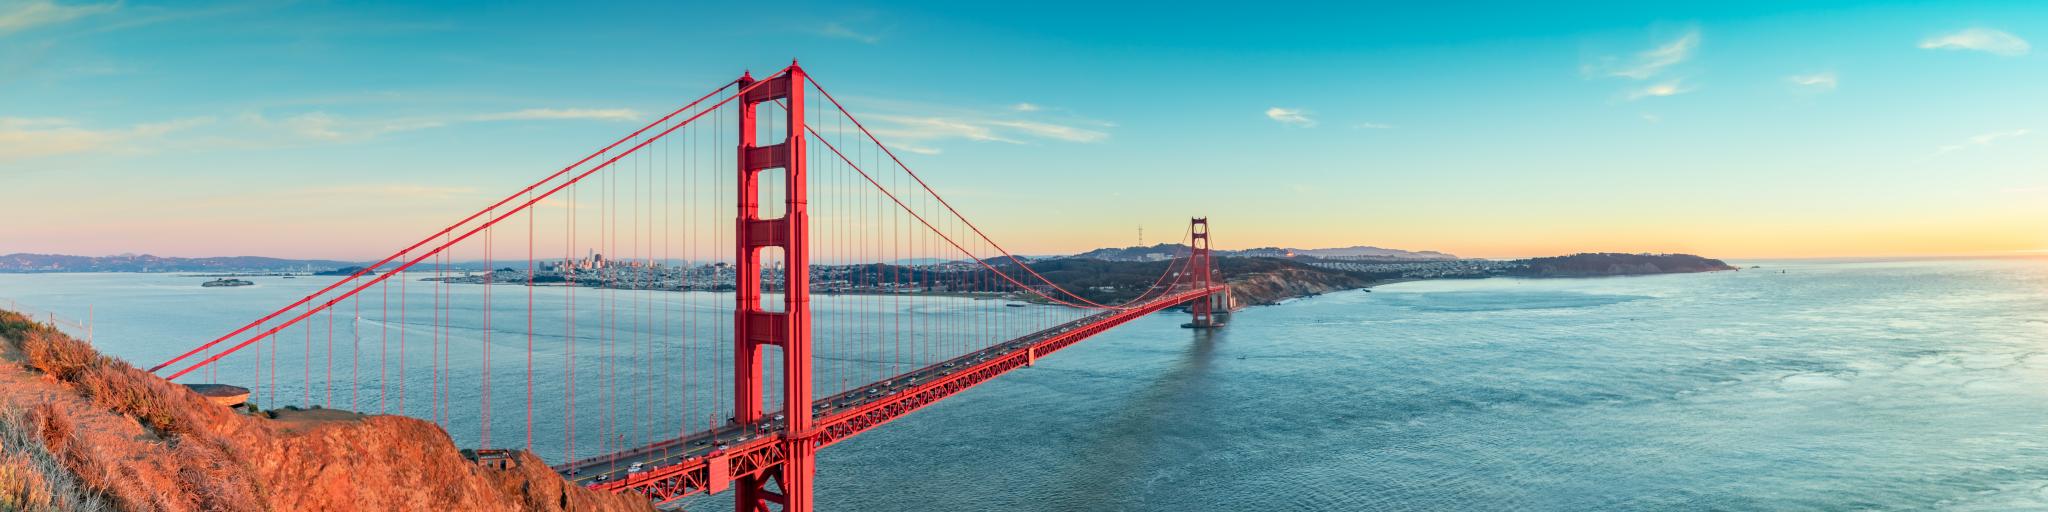 Best time to go to San Francisco to see the Golden Gate Bridge and explore the city